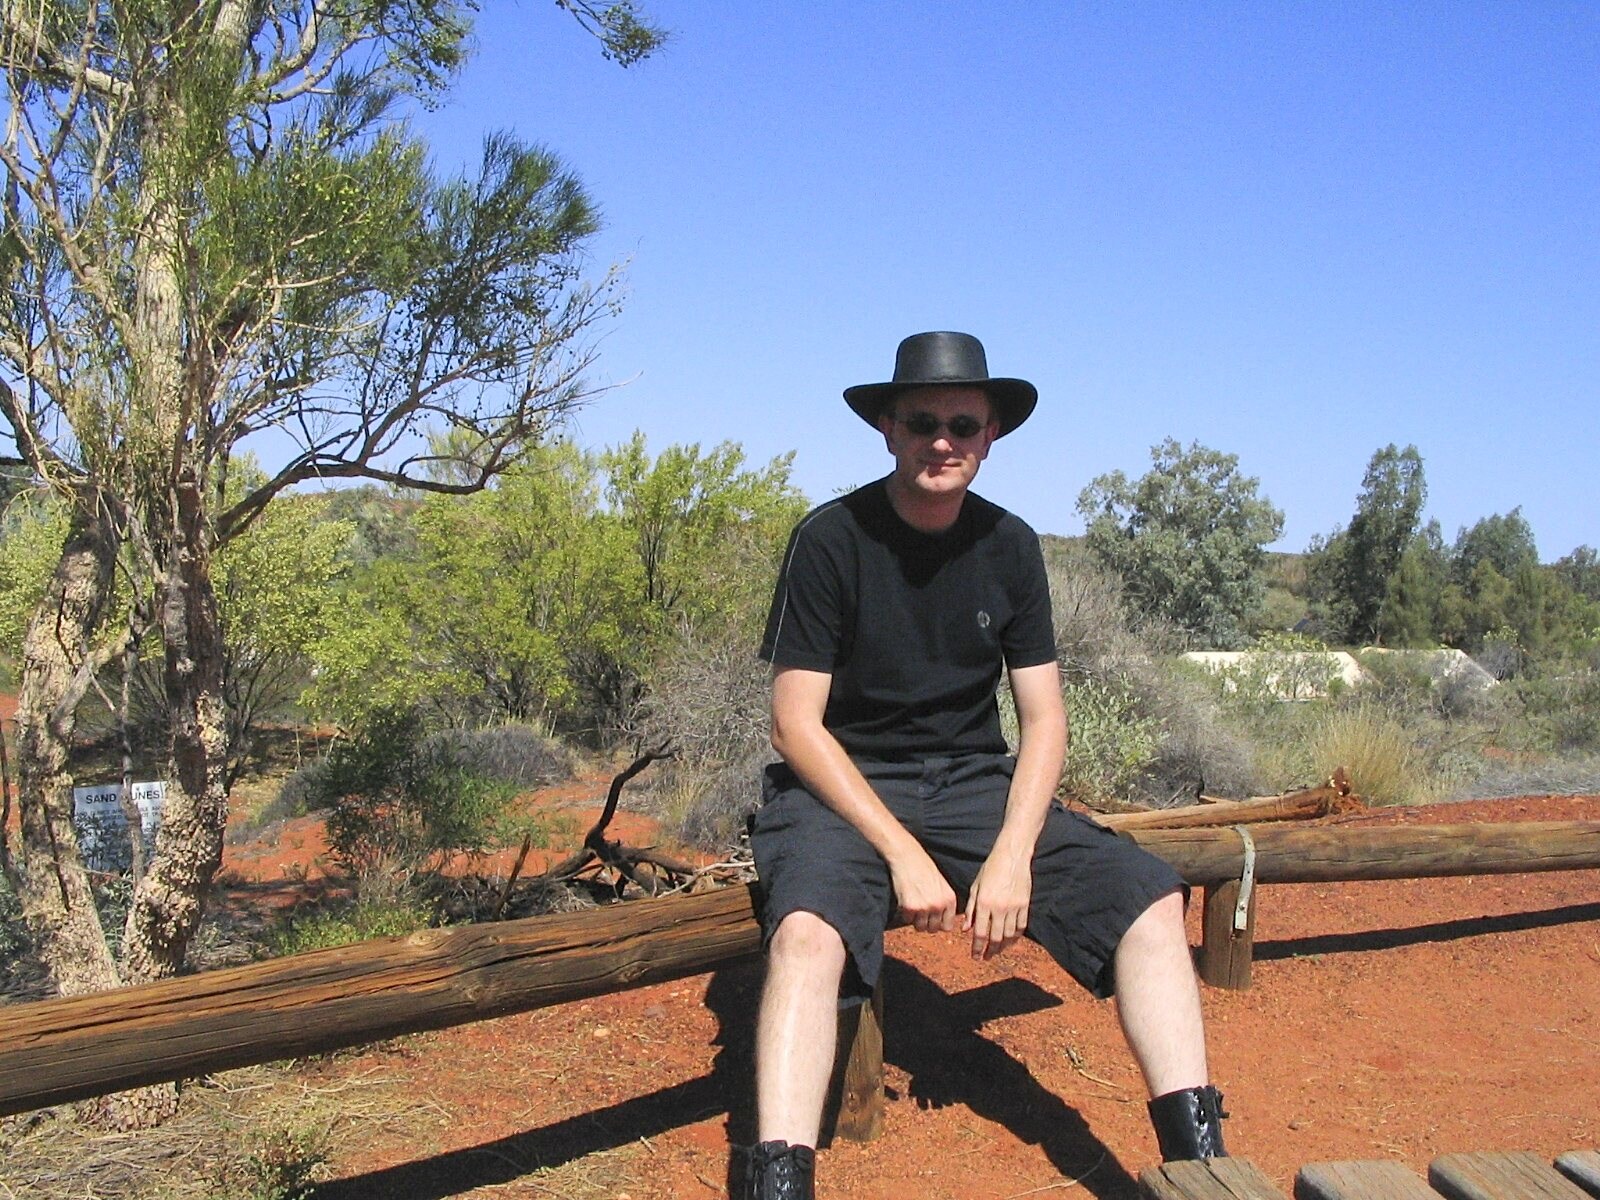 A self-timer shot of Nosher's gnarly legs from The Red Centre: Yulara and Uluru, Northern Territories, Australia - 8th October 2004